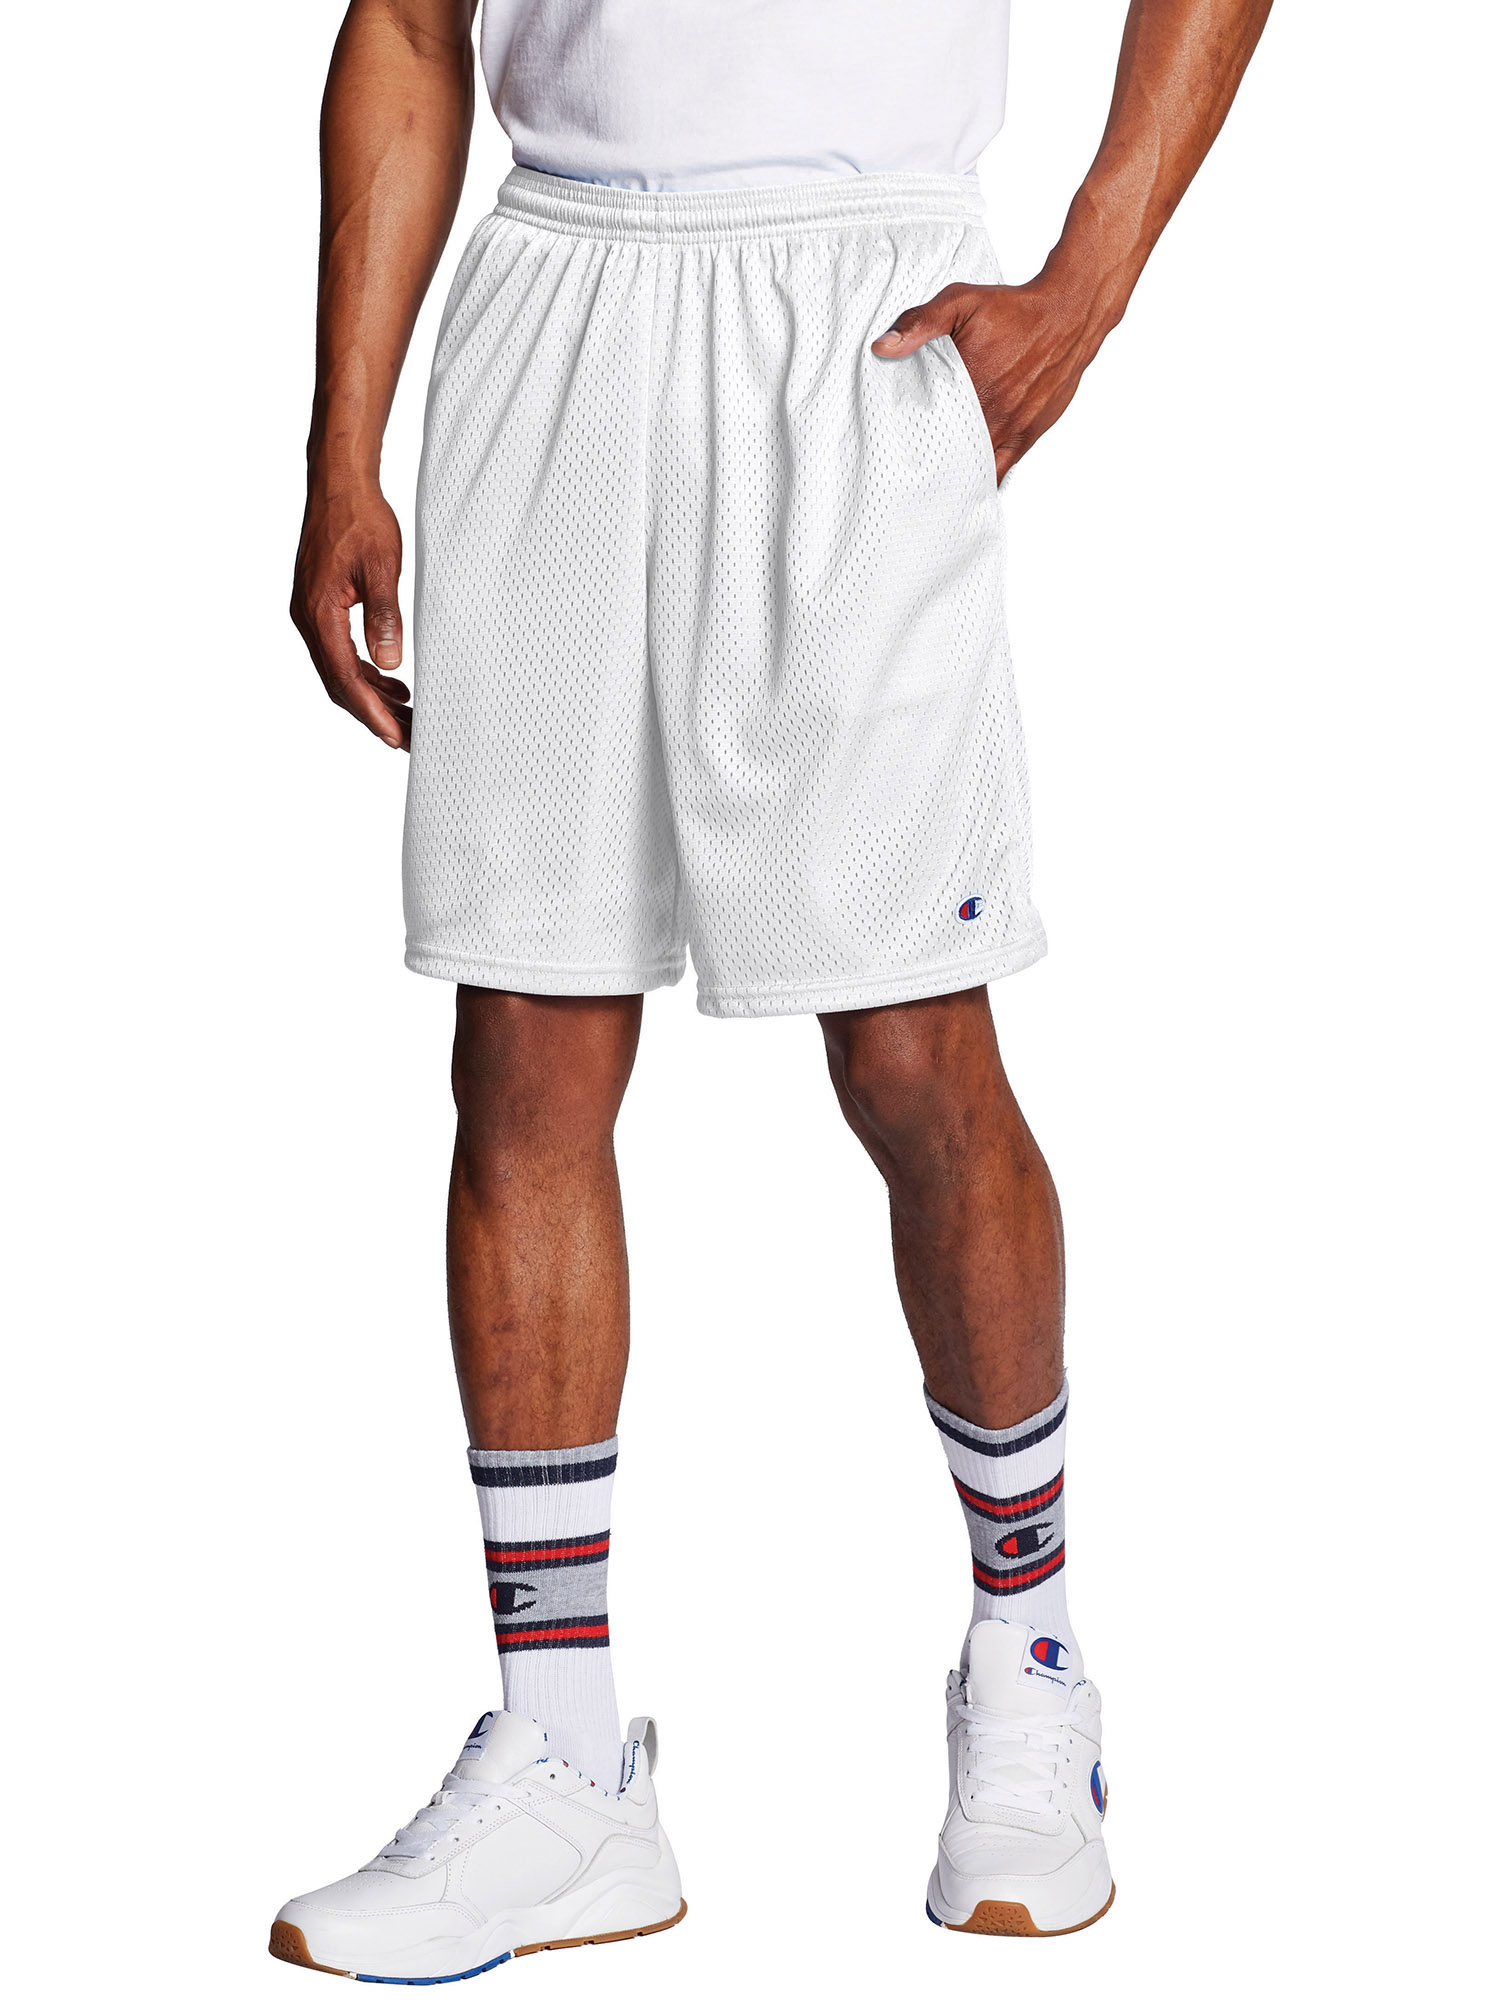 Champion Men's Long Mesh 9" Shorts with Pockets, up to Size 4XL - image 1 of 5